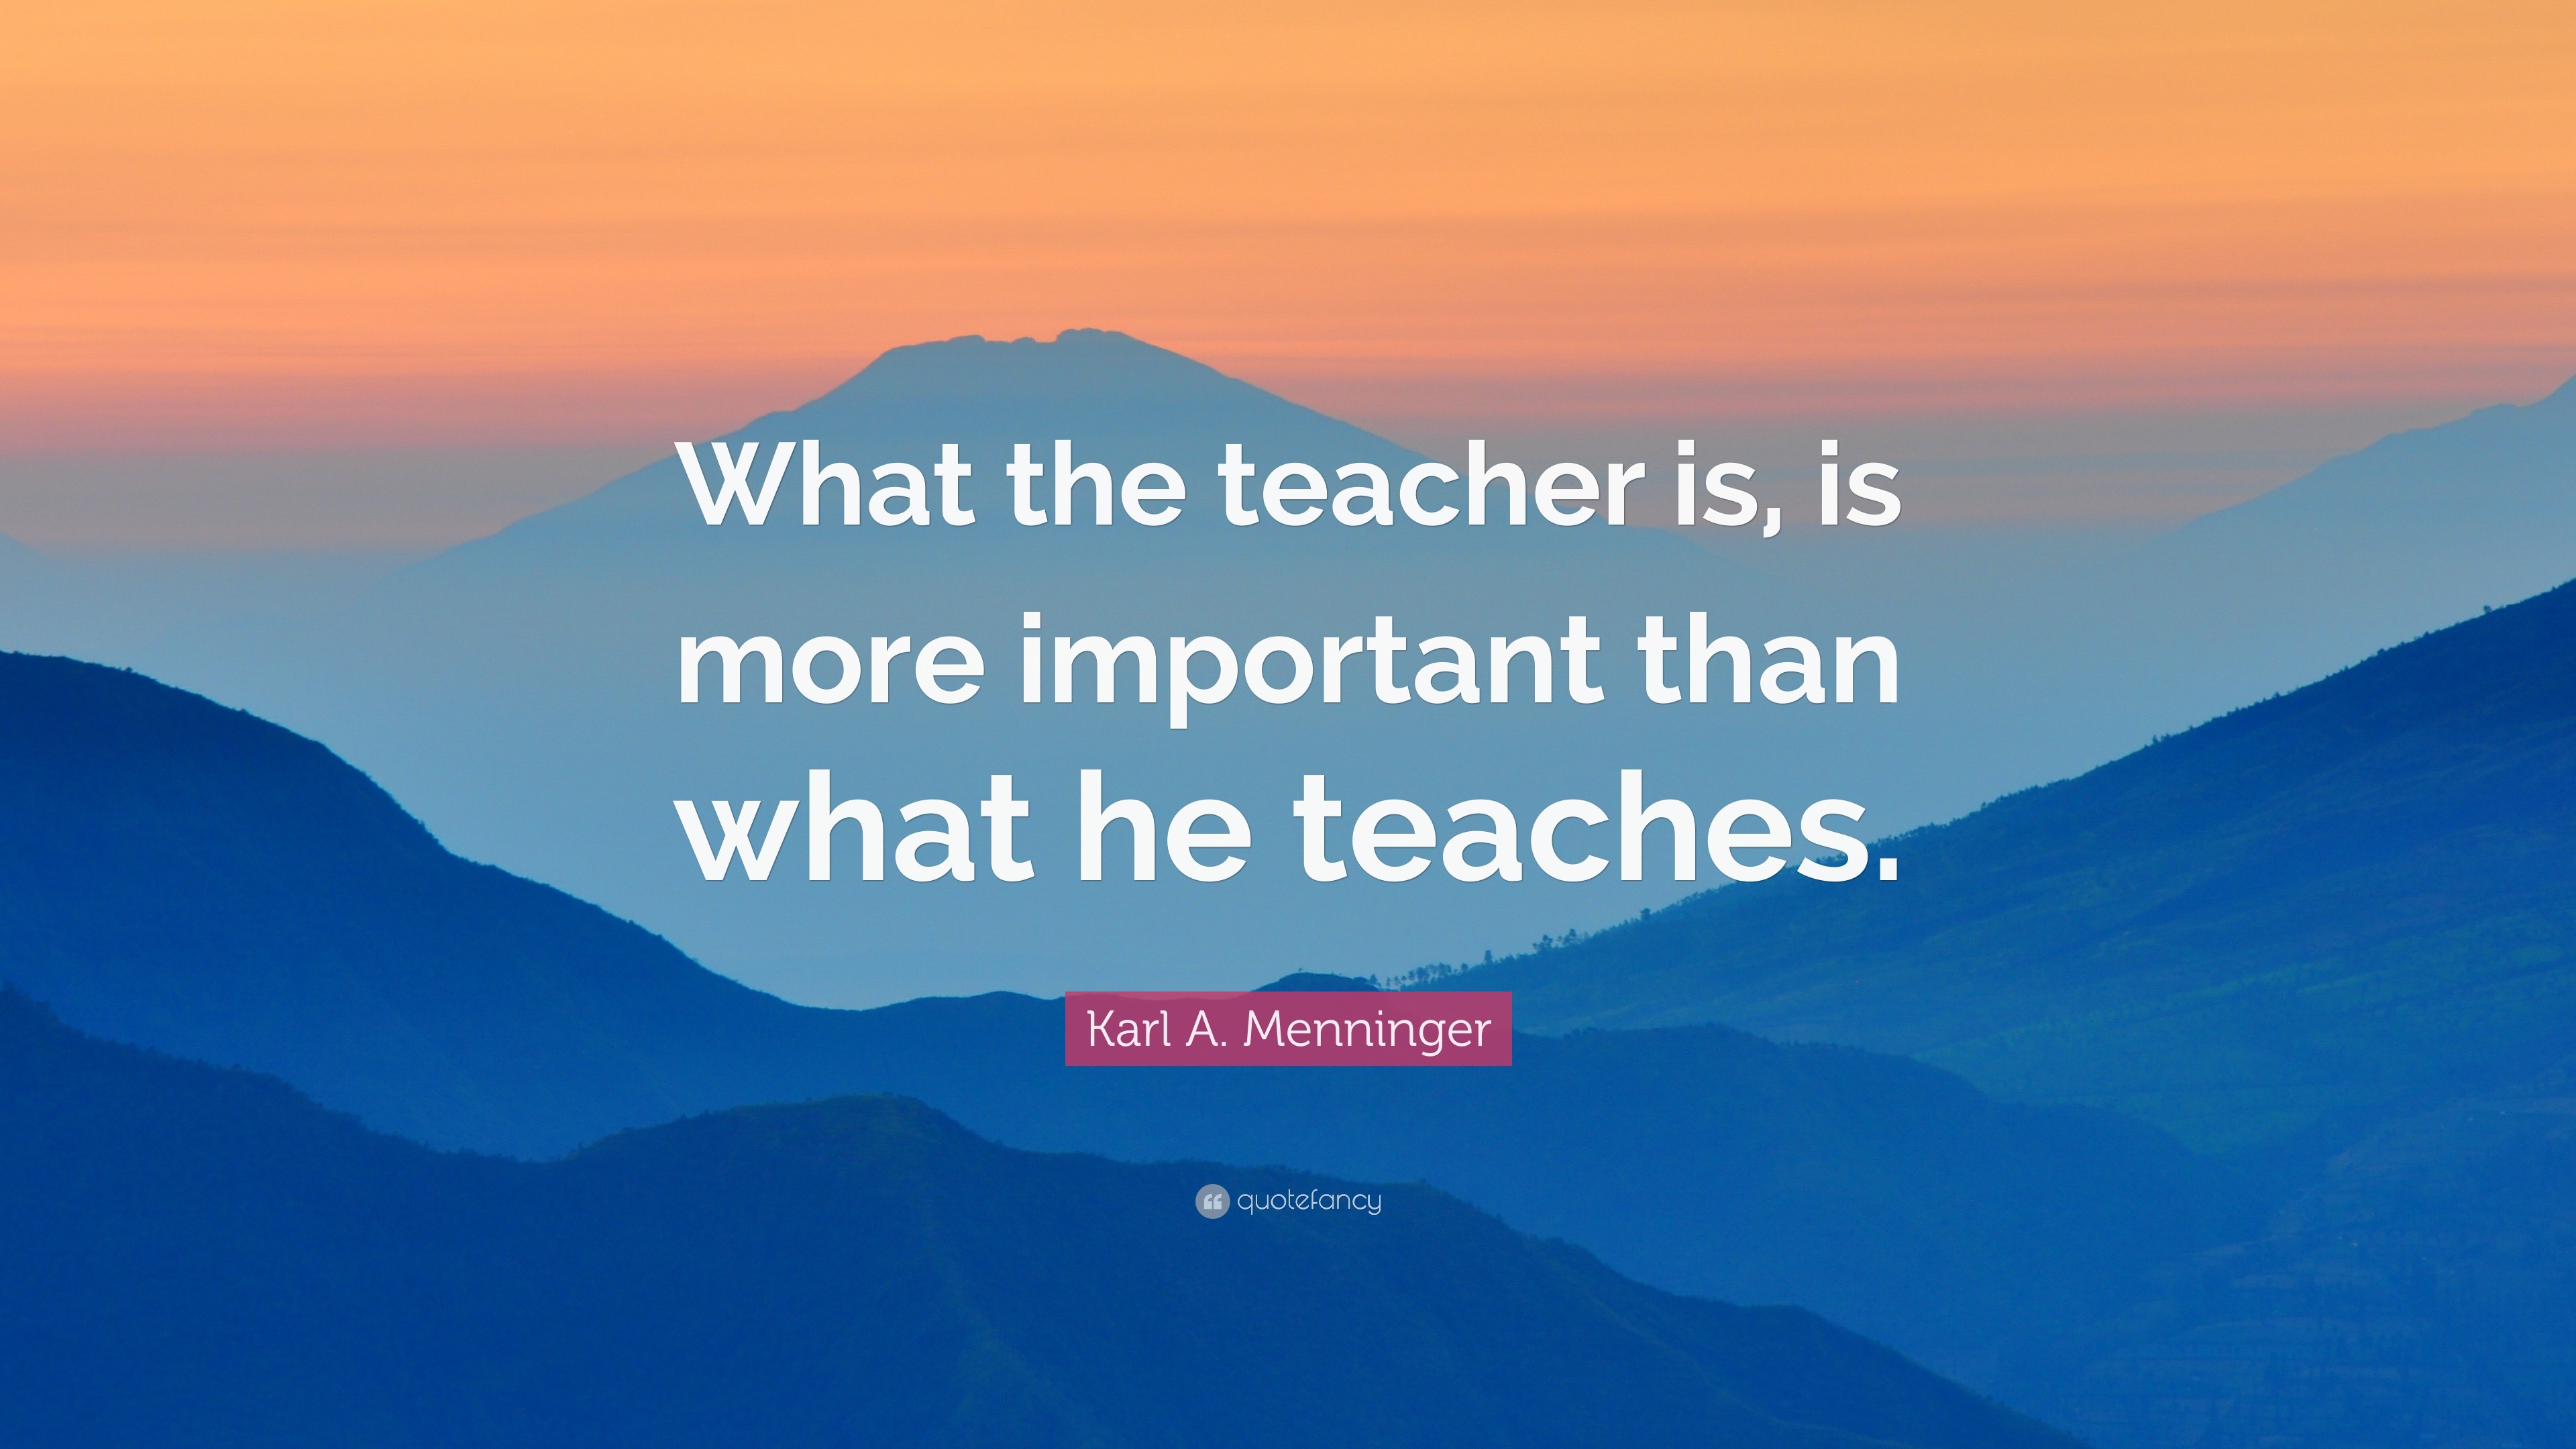 Karl A. Menninger Quote: “What the teacher is, is more important than ...